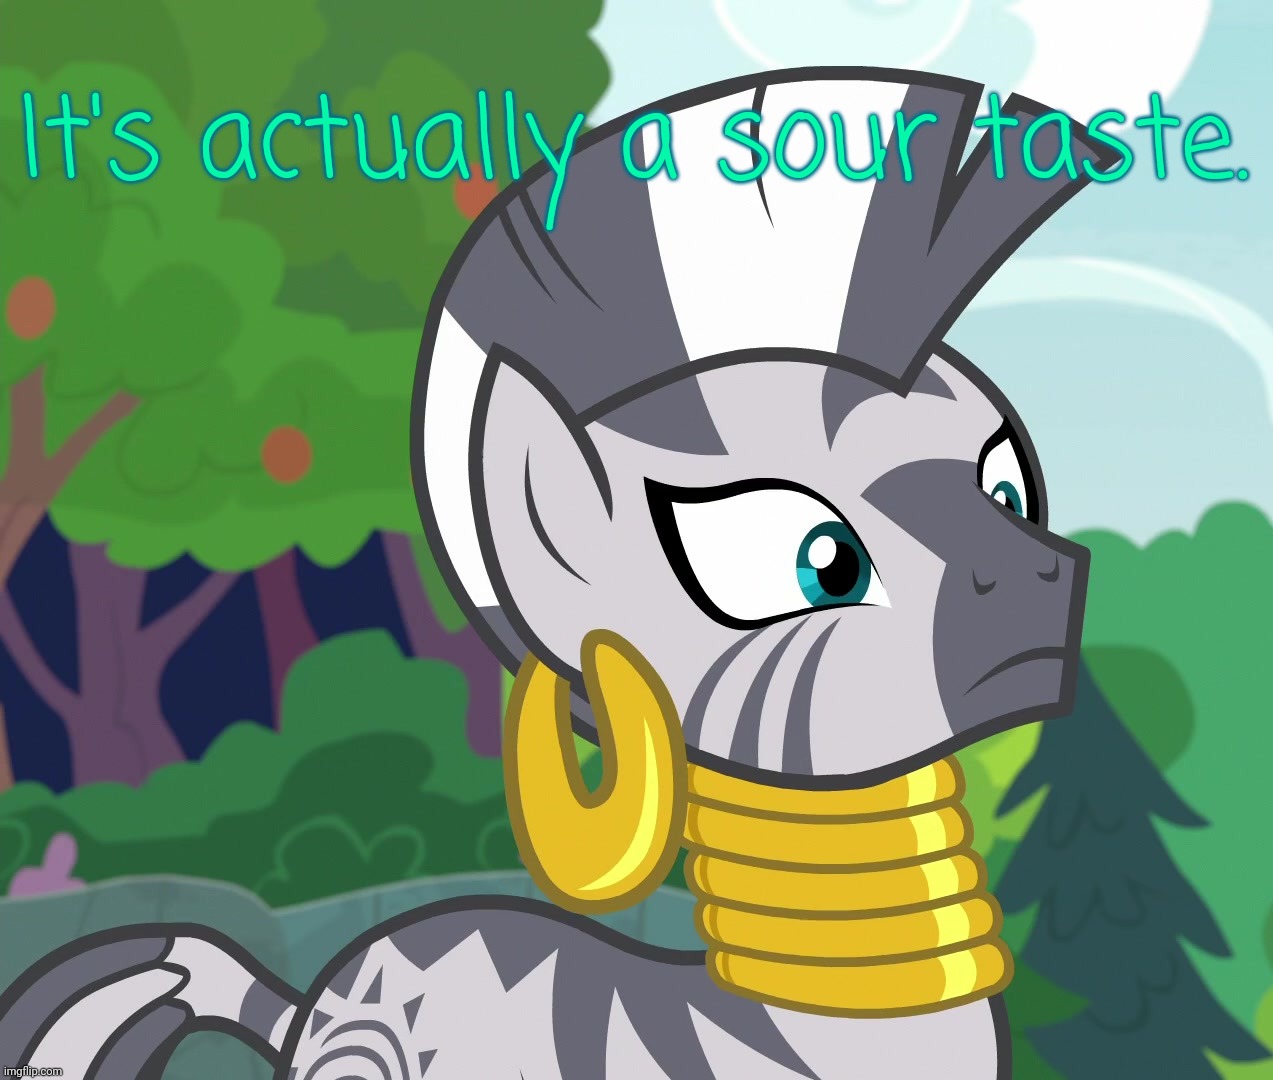 Concerned Zecora (MLP) | It's actually a sour taste. | image tagged in concerned zecora mlp | made w/ Imgflip meme maker